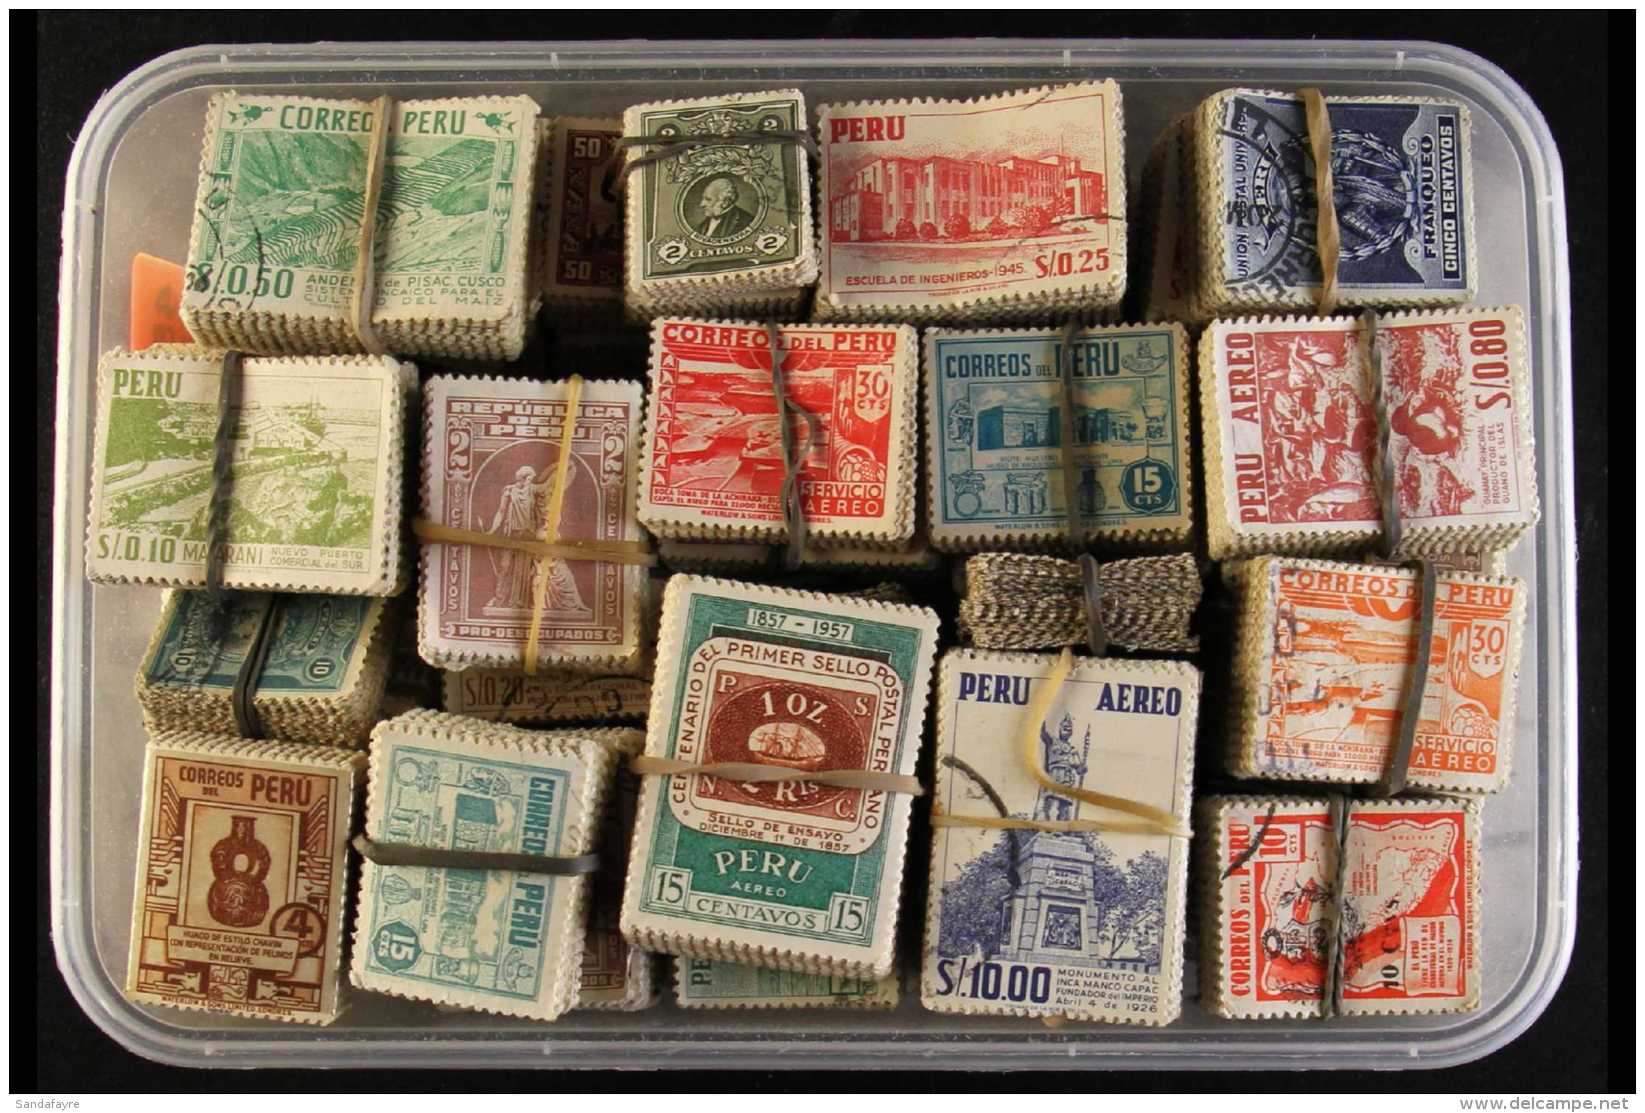 1950's BUNDLEWARE Mostly Used Stamps In Bundles, A Few Mint And Earlier Issues Seen. Fresh. (approx 6,000 Stamps)... - Peru